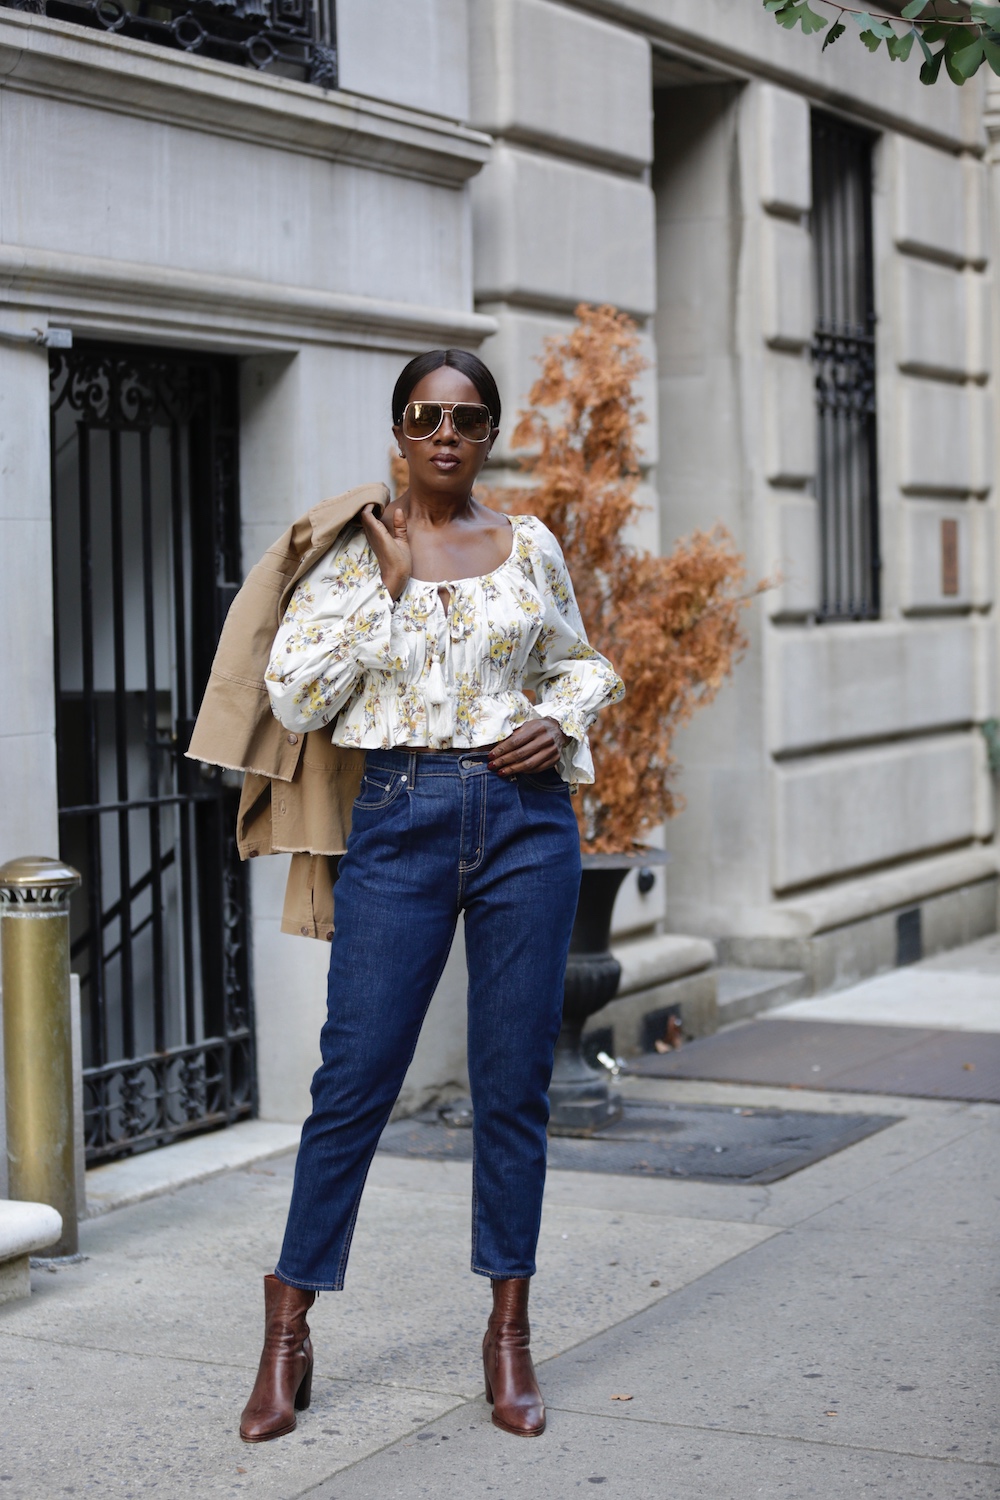 The Best Affordable Jeans Of 2019 | Square Pearls